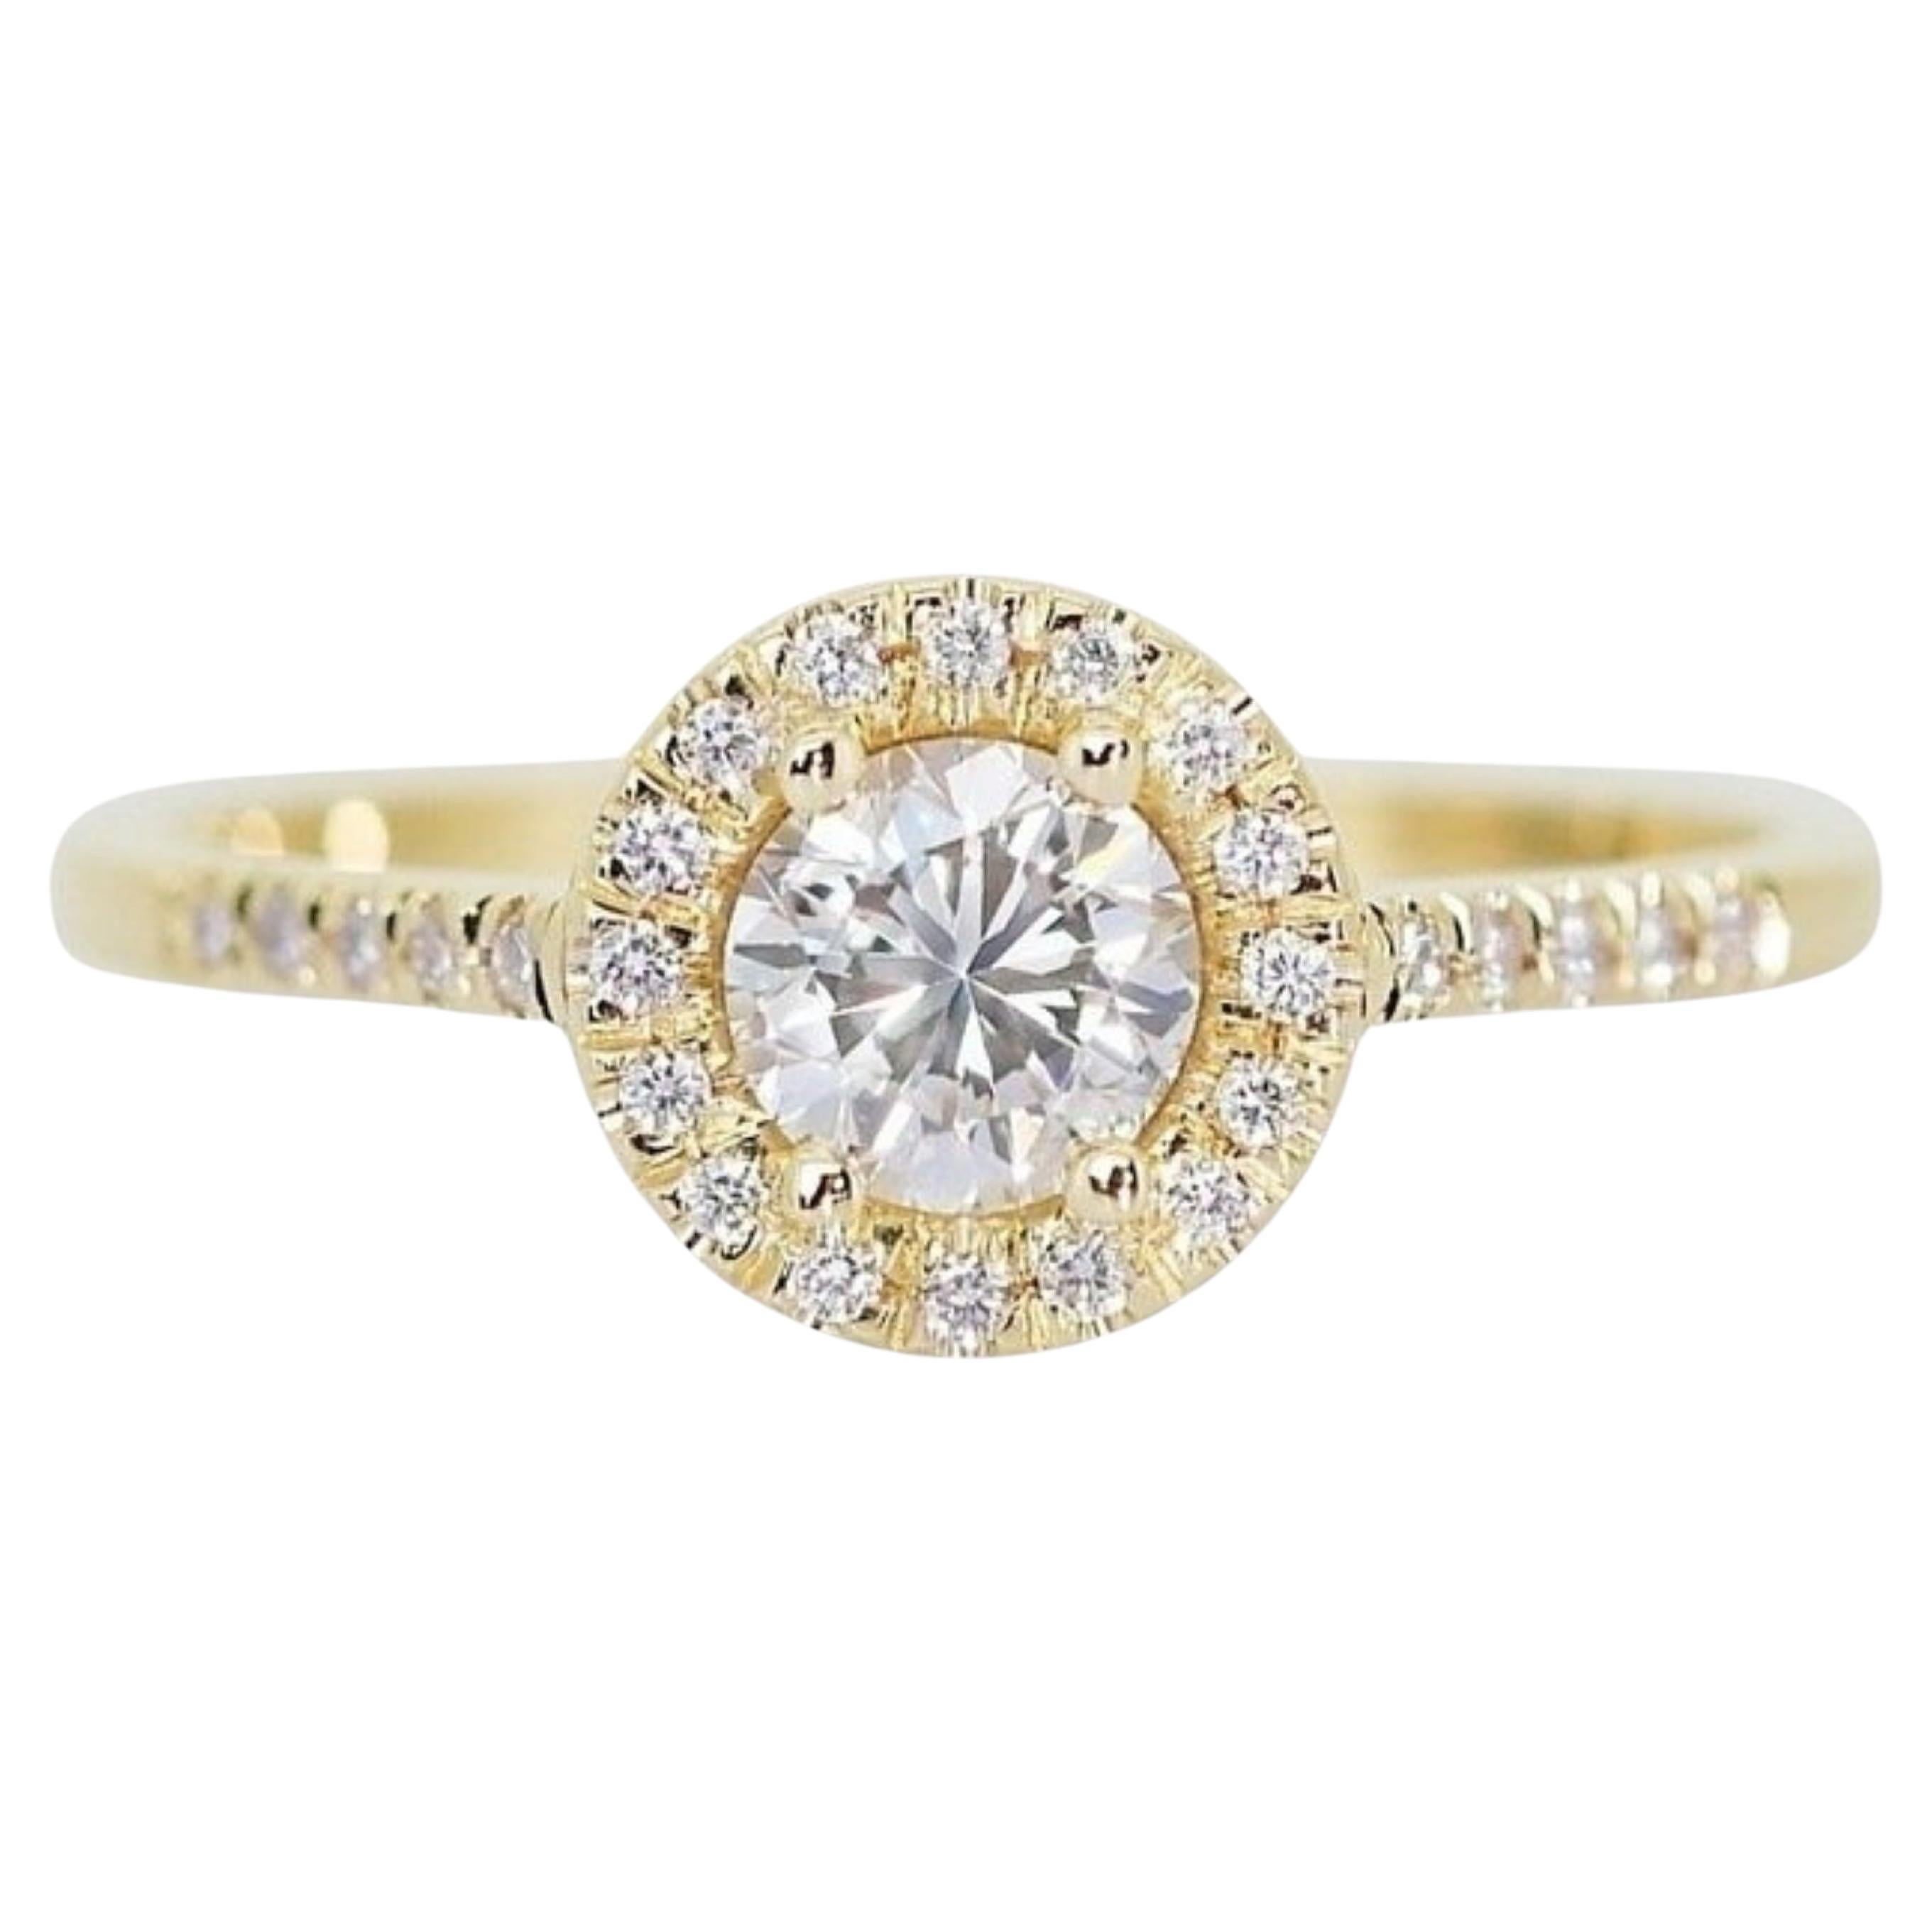 Marvelous 18k Yellow Gold Ring with 2.6 carat Natural Diamond For Sale